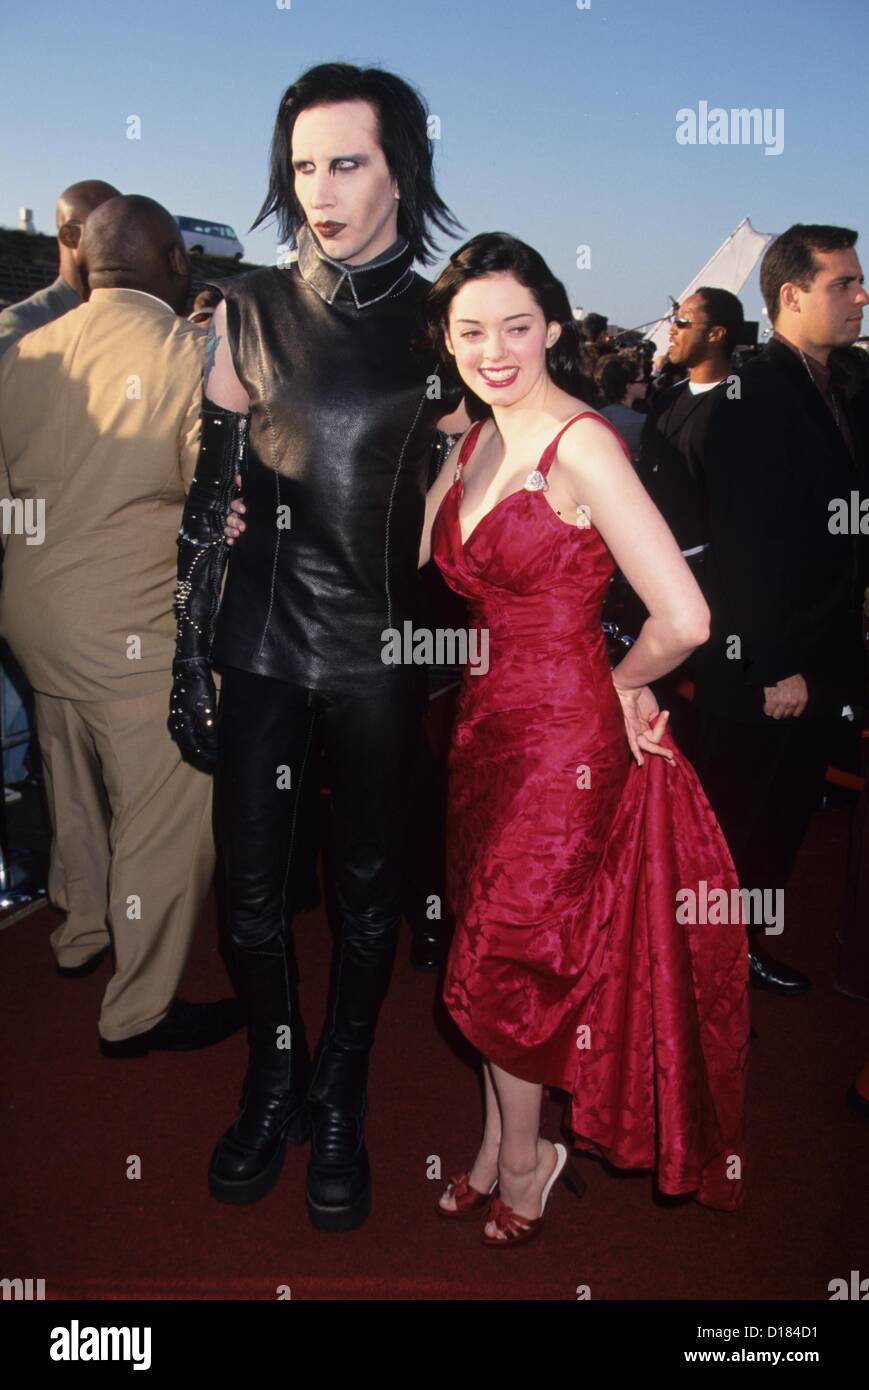 Rose Mcgowan 1999 High Resolution Stock Photography and Images - Alamy